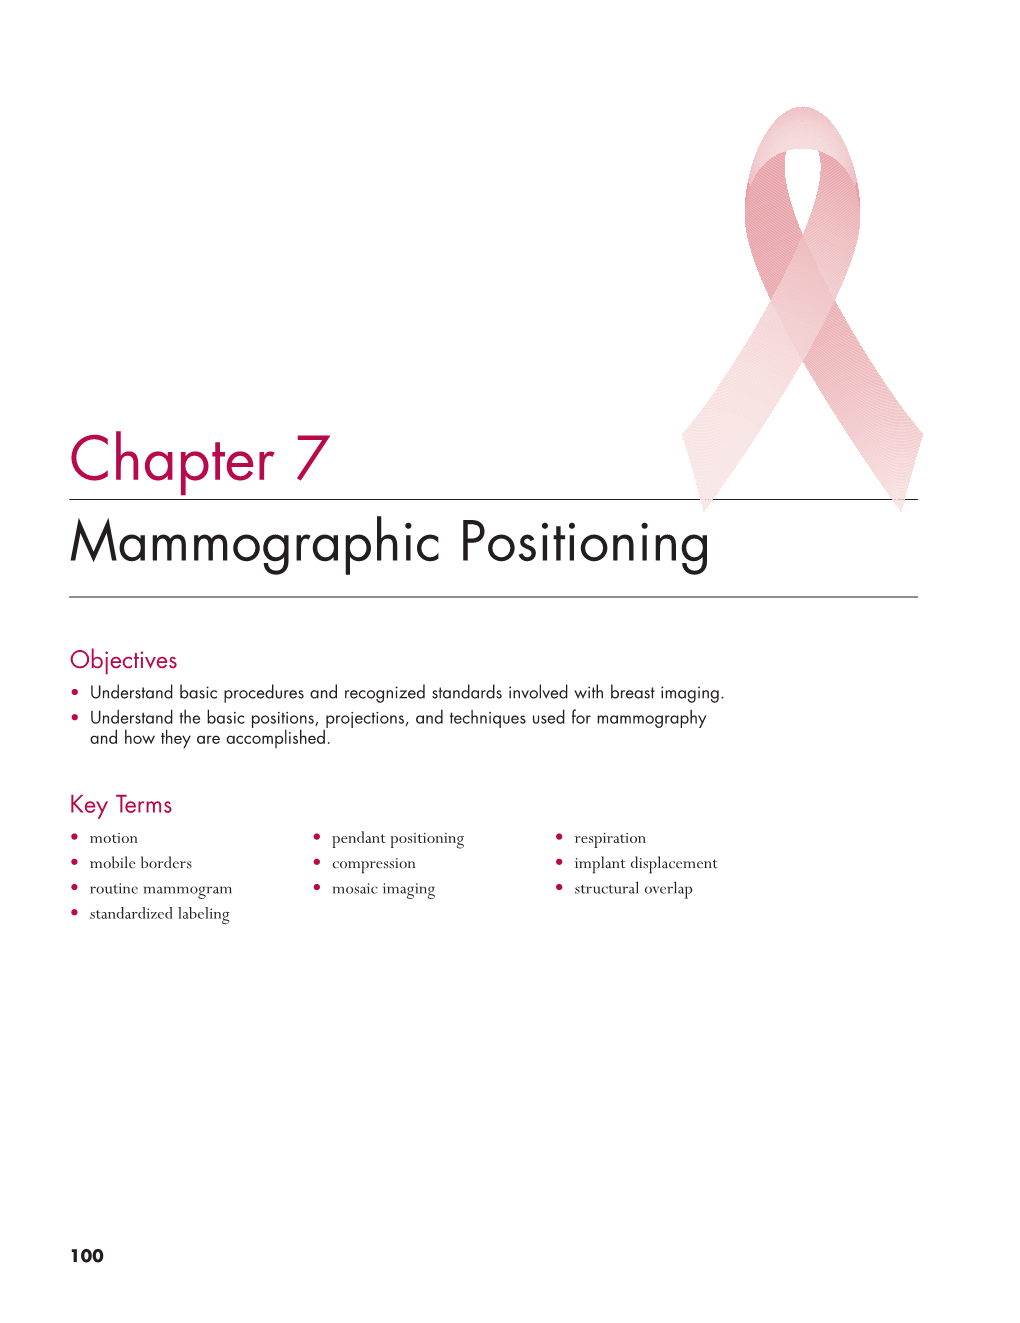 Chapter 7 Mammographic Positioning